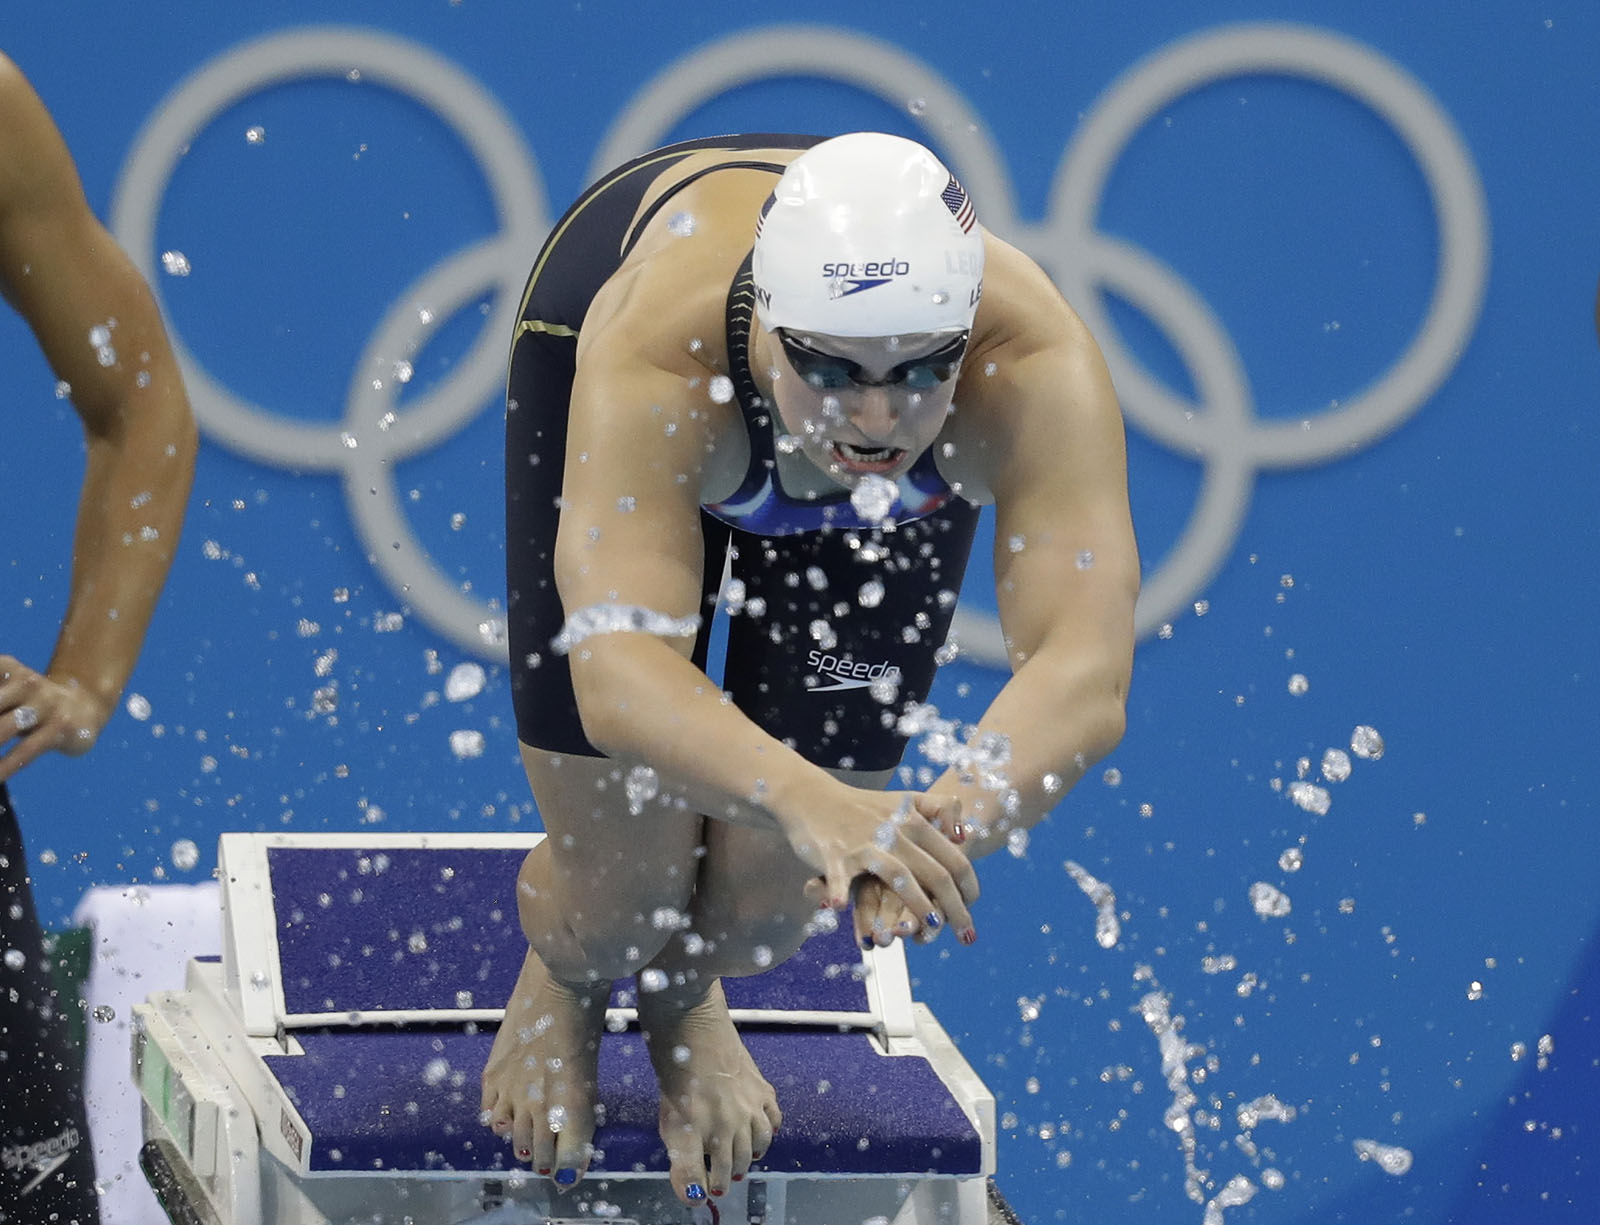 United States' Katie Ledecky starts her portion of a women's 4x100-meter freestyle relay heat during the swimming competitions at the 2016 Summer Olympics, Saturday, Aug. 6, 2016, in Rio de Janeiro, Brazil. (AP Photo/Michael Sohn)